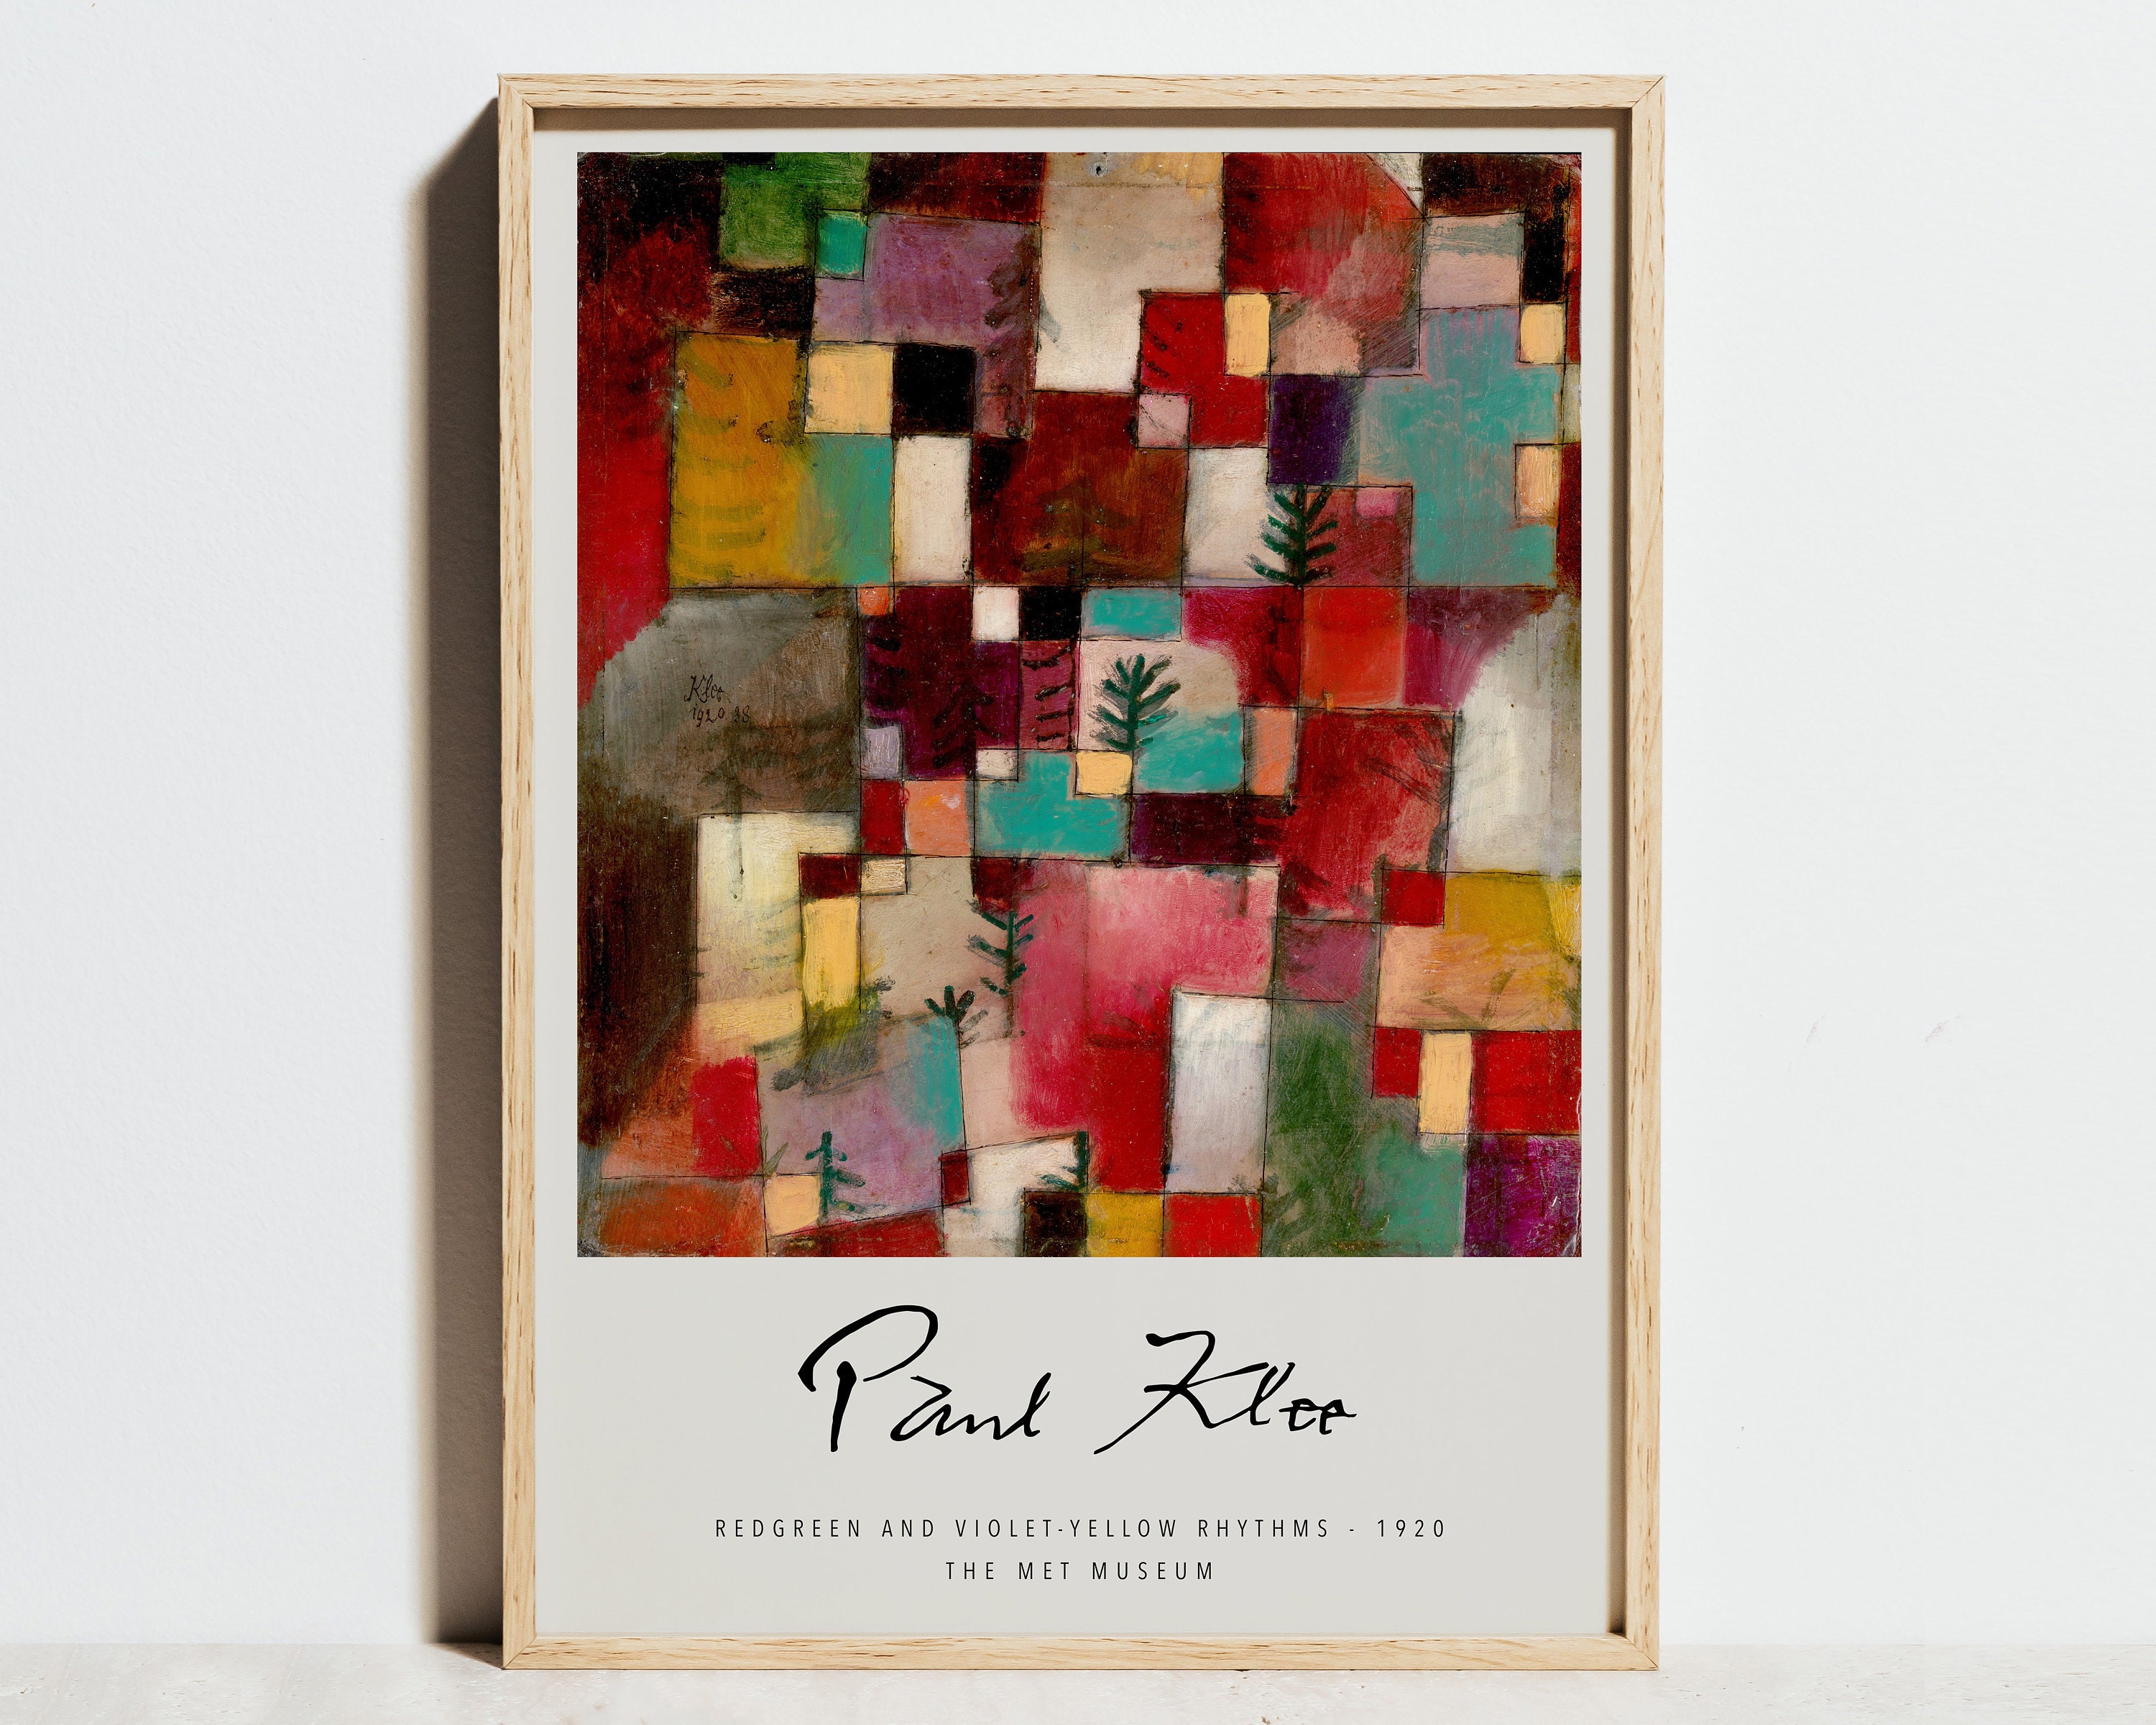 Exhibition Poster Digital Poster Paul Klee Decor Wall Art Wall art decor Digital Print Gallery Print Quality Print Home and Living